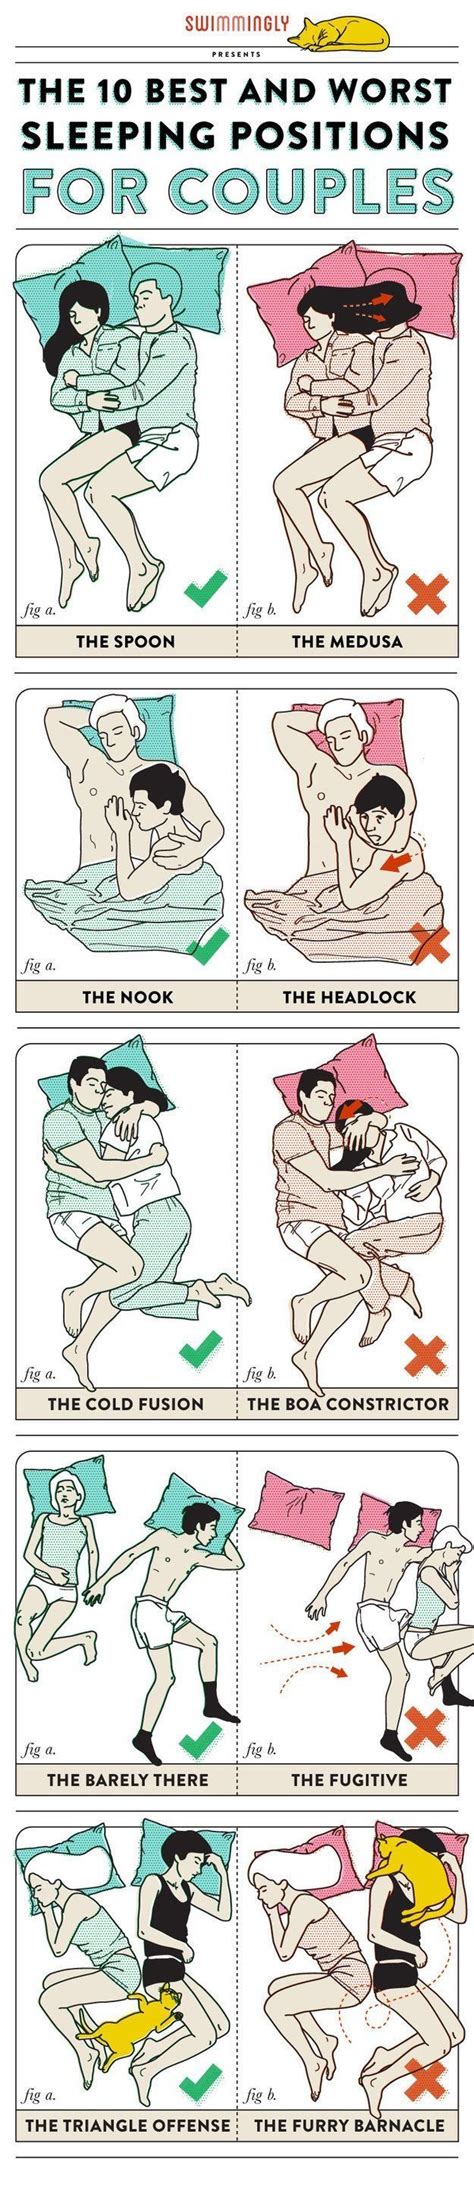 (h/t the frogman , for sharing this image.) The 101 Guide To Couple Sleeping Positions And It's Meaning